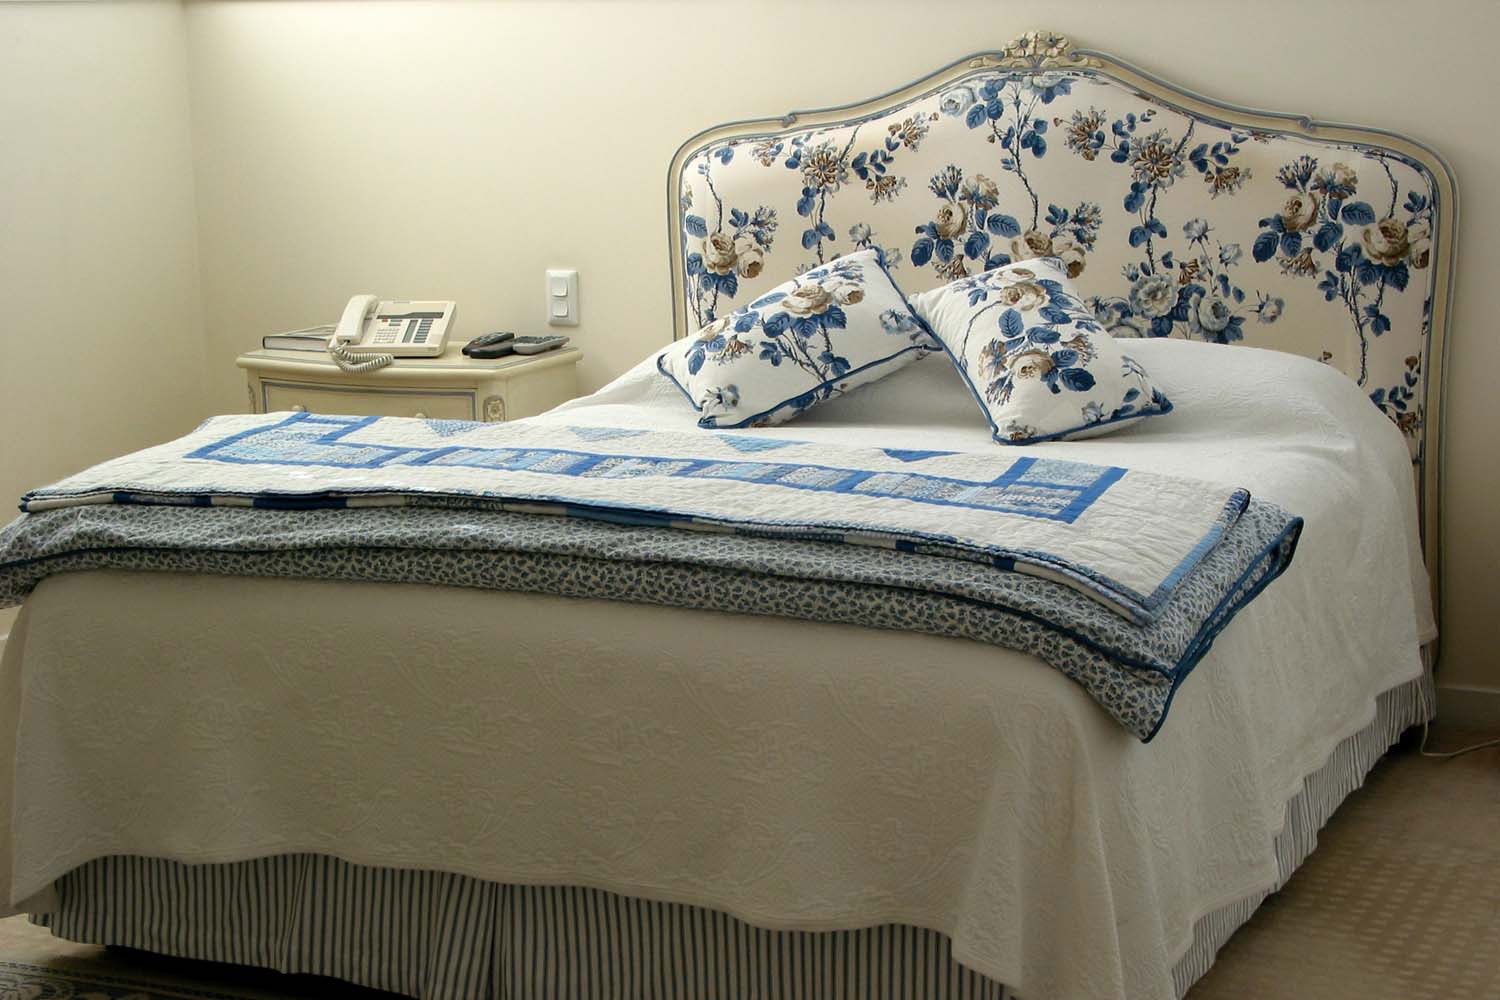 6 French bed with white painted bedhead and blue floral patterns